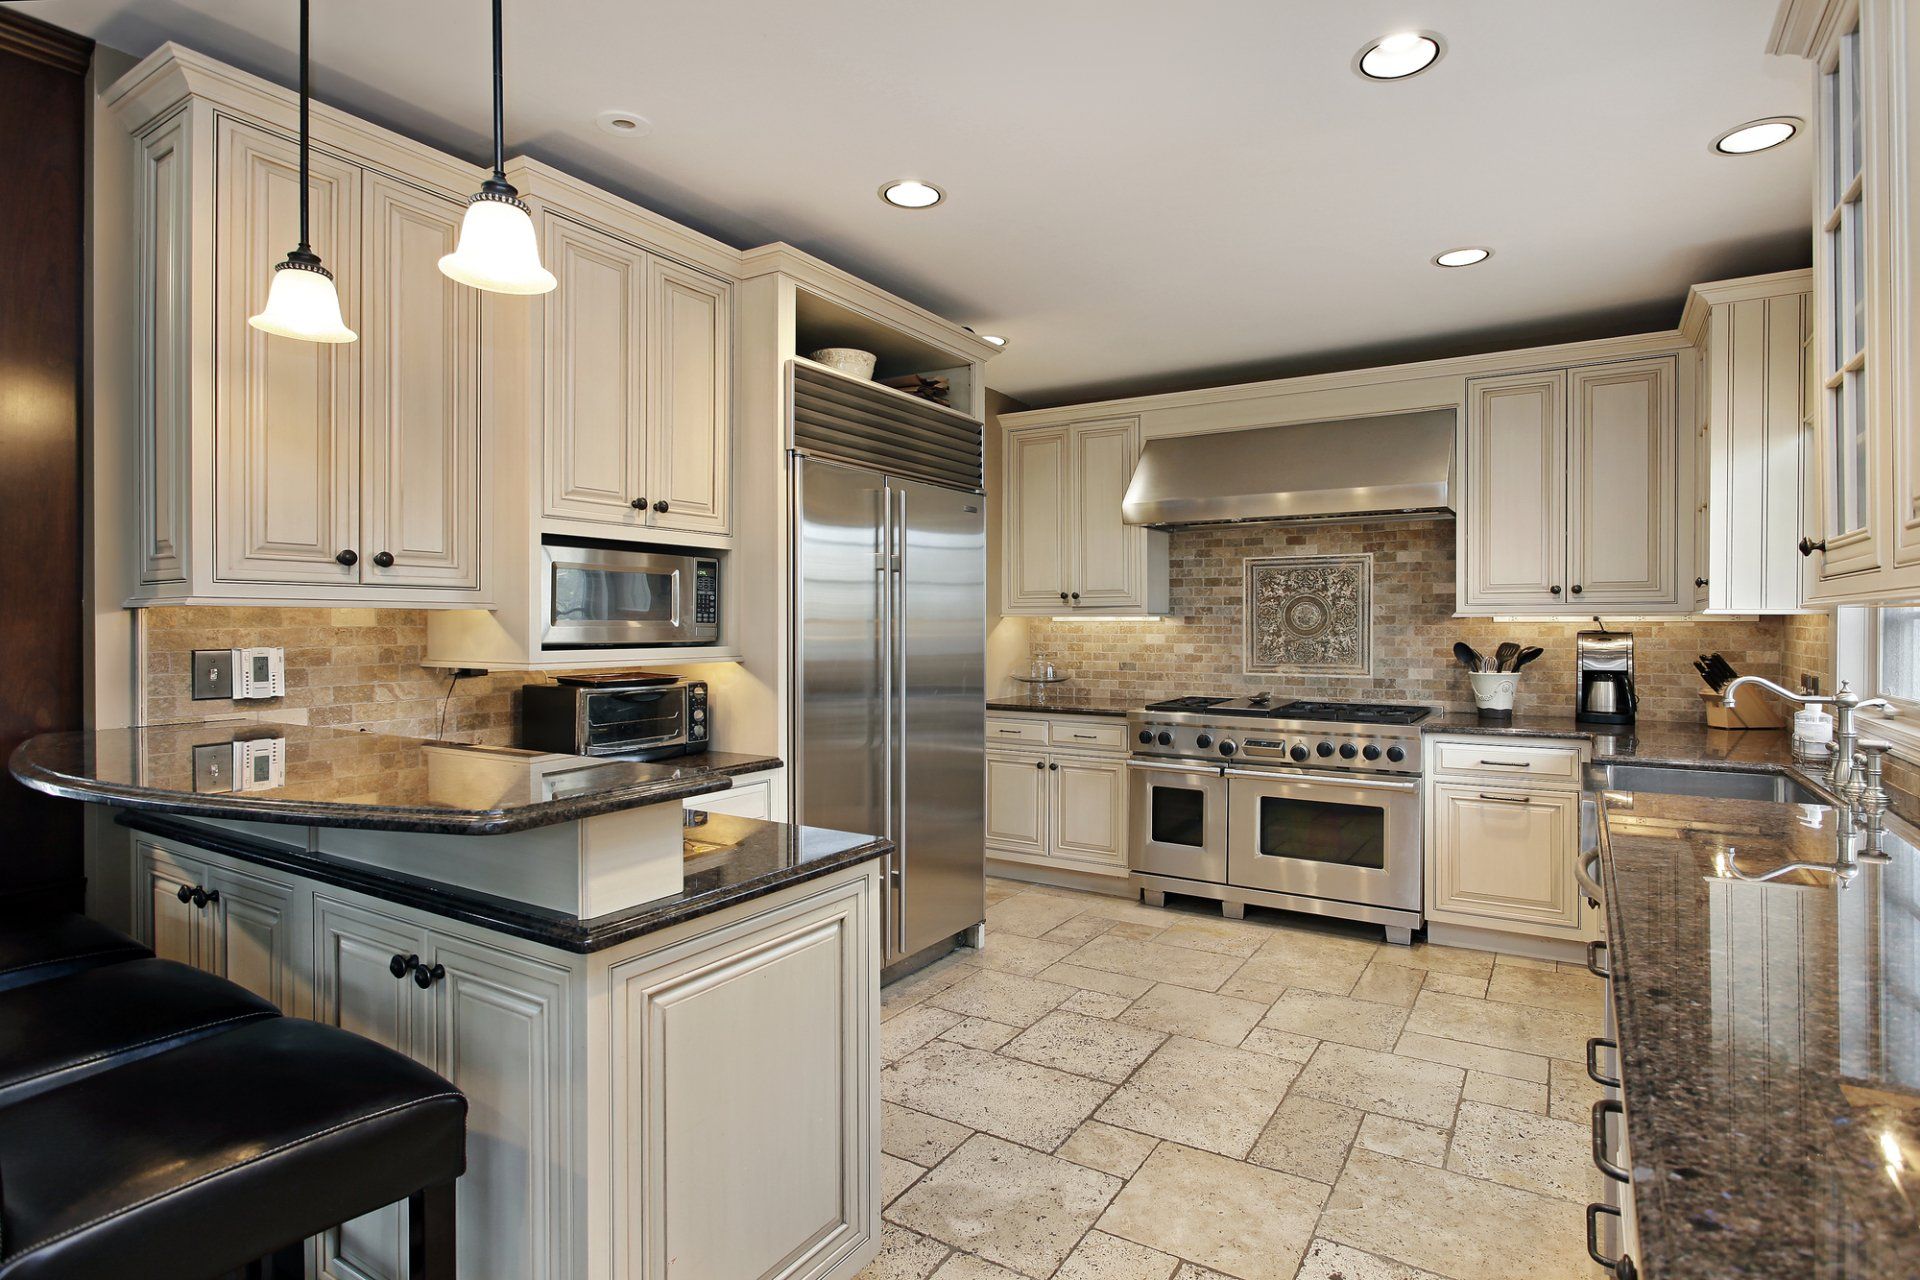 Kitchen Remodeling Service in Ankeny, IA